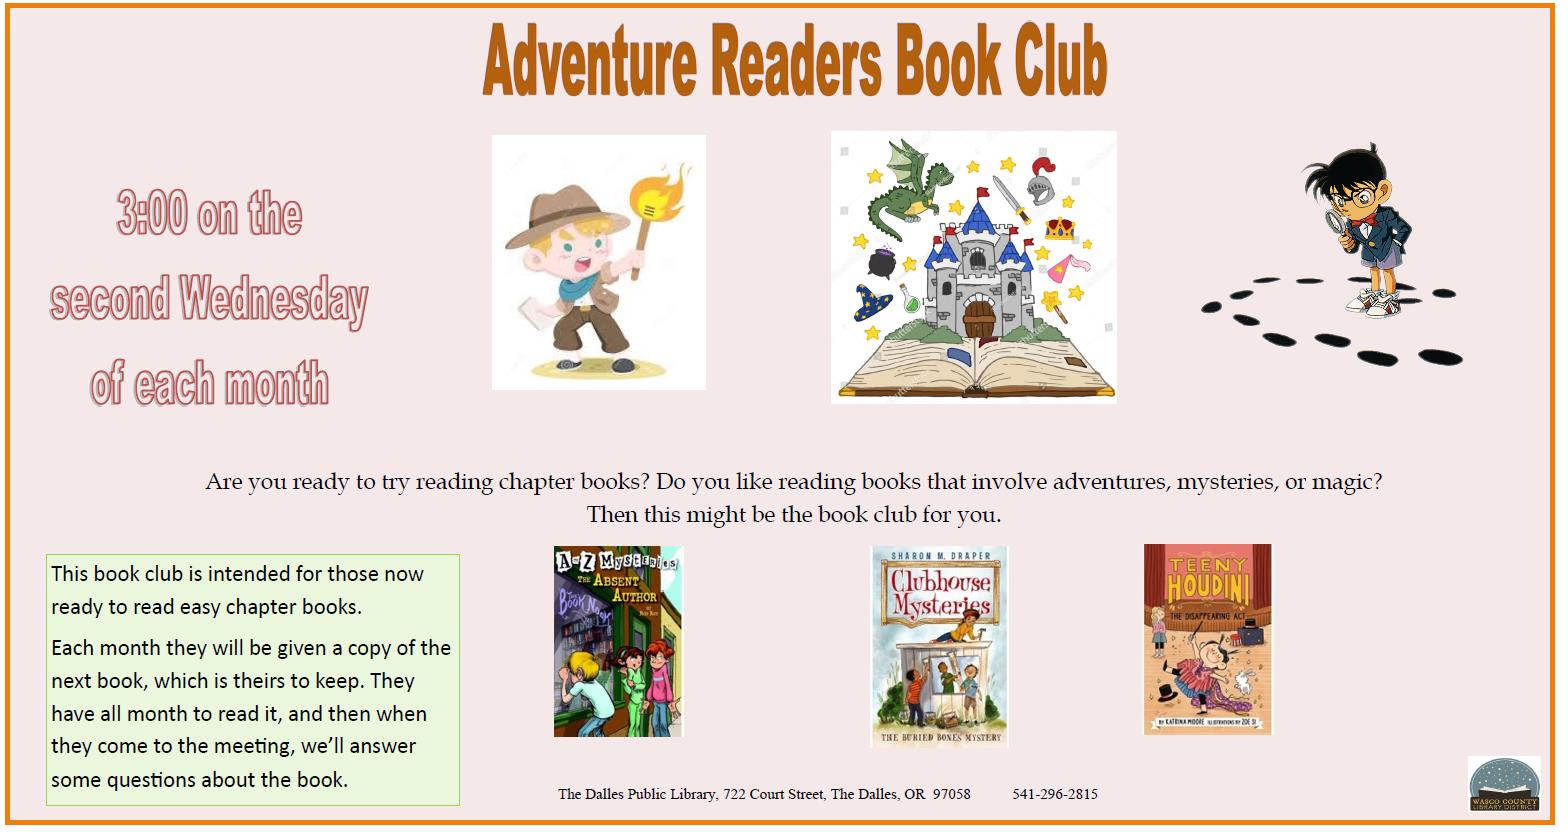 Adventure Readers book club, second Wednesday of the month